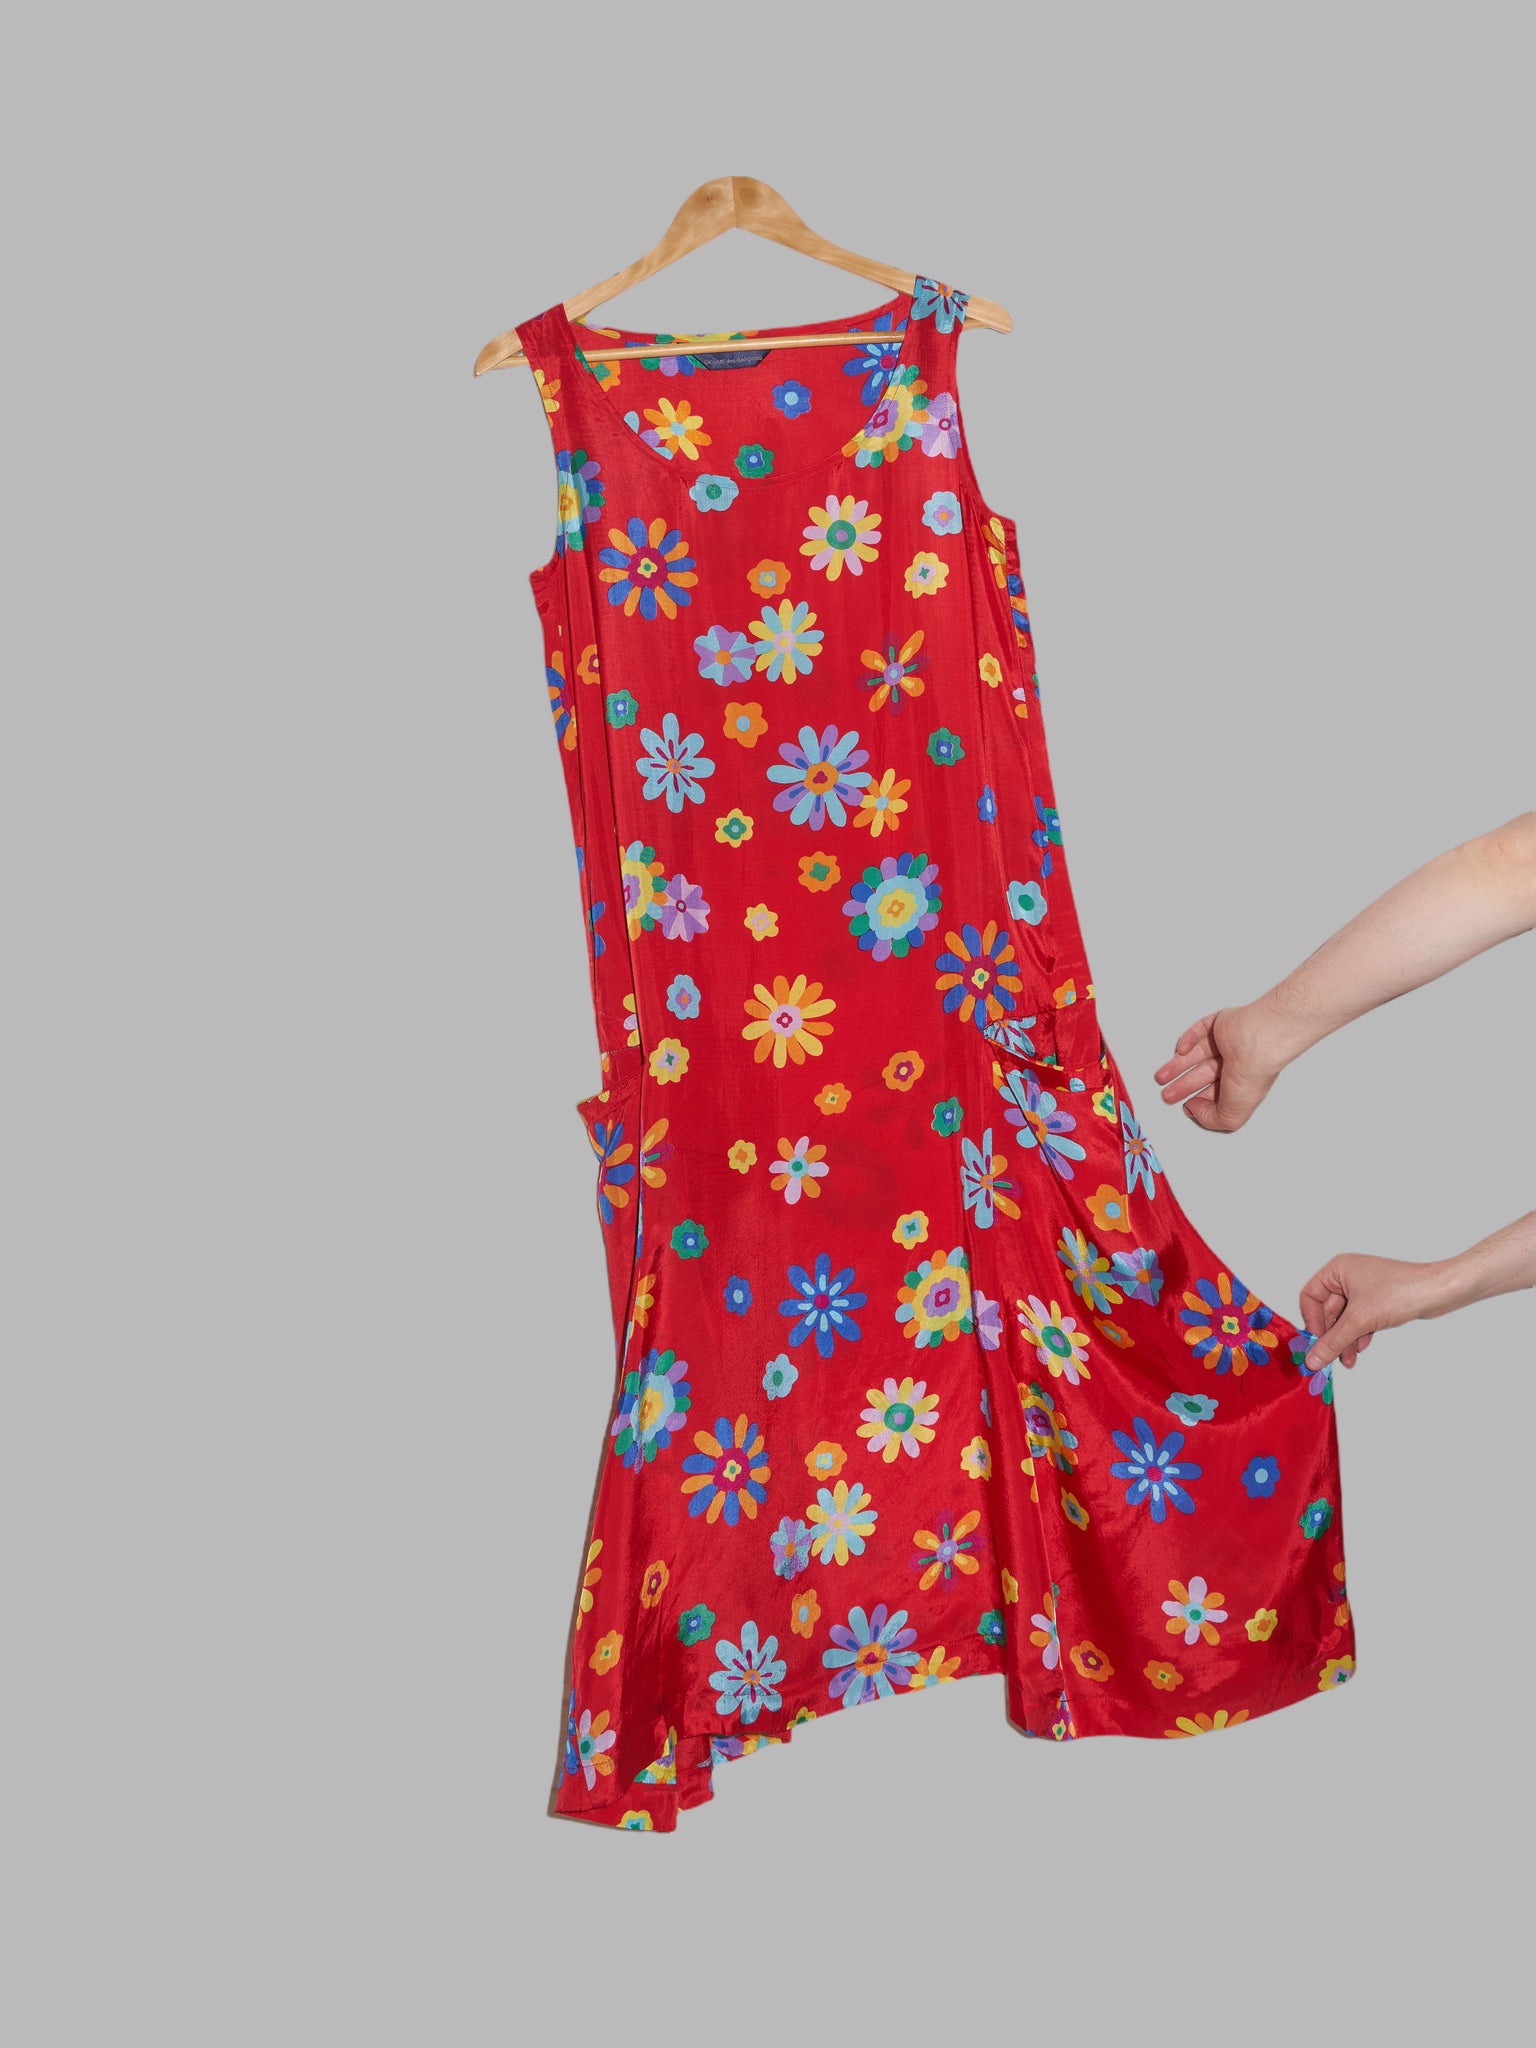 Comme des Garcons 1996 red floral print rayon sleeveless maxi dress